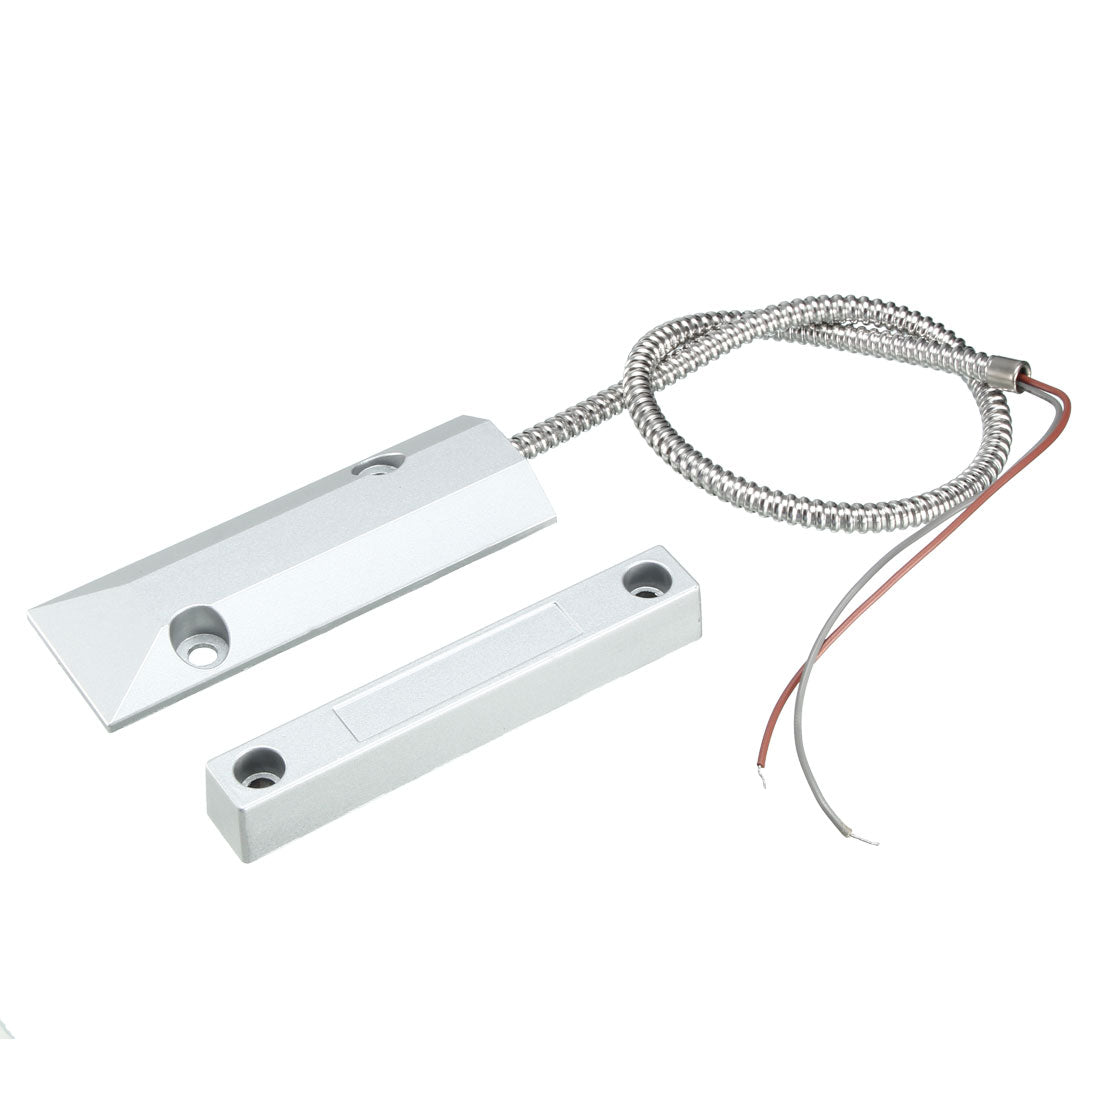 uxcell Uxcell OC-55 NO Alarm Security Rolling Gate Garage Door Contact Magnetic Reed Switch